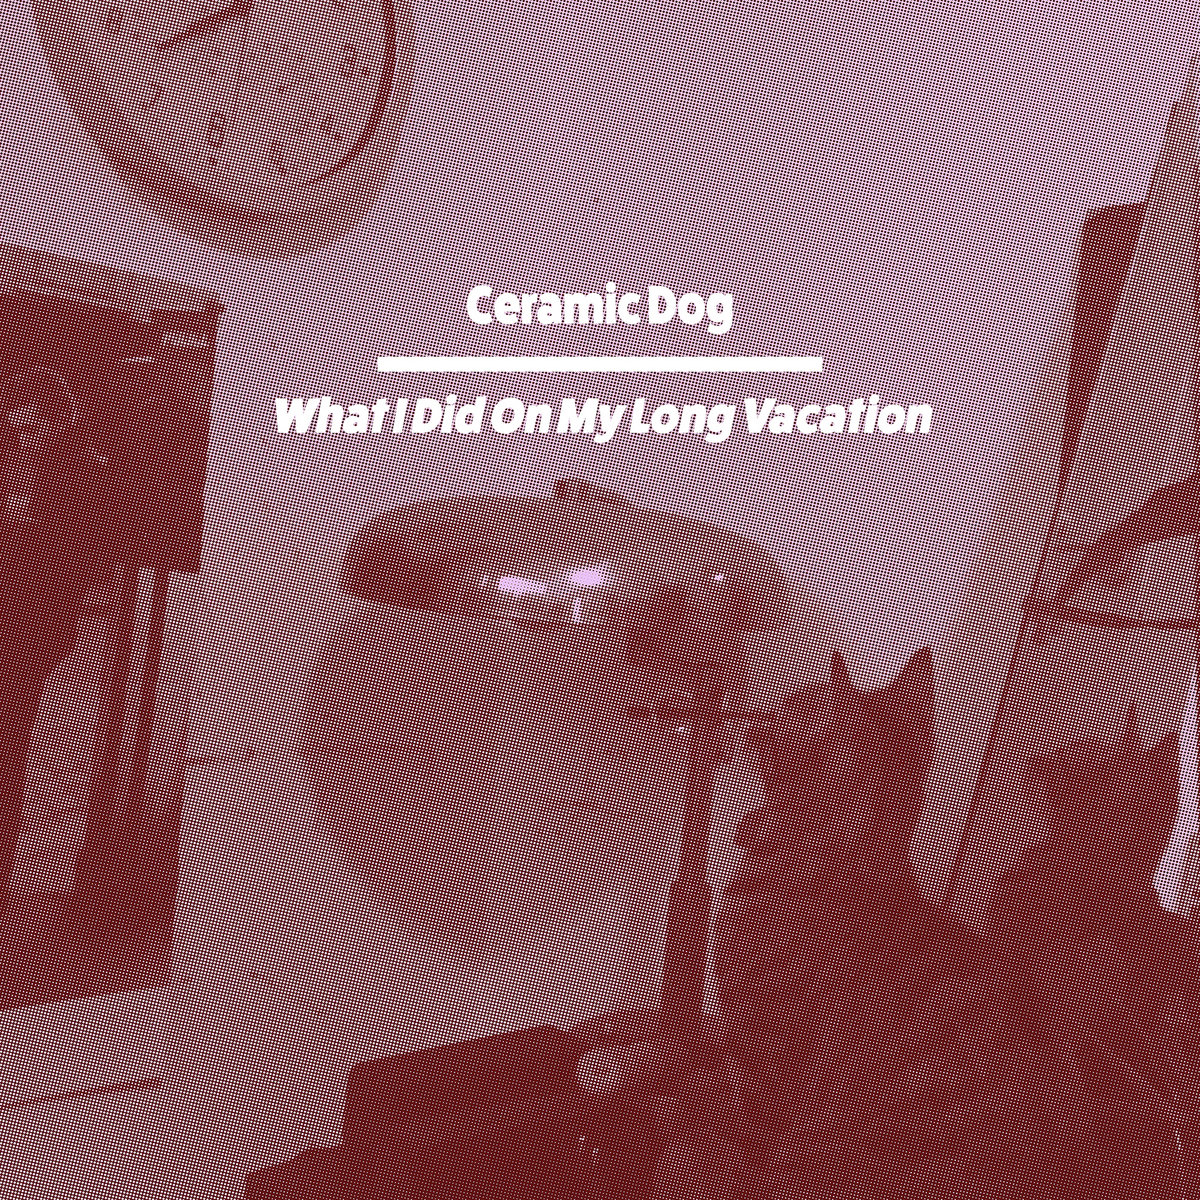 Marc Ribot’s Ceramic Dog – What I Did On My Long ‘Vacation’ (2020) [Official Digital Download 24bit/96kHz]